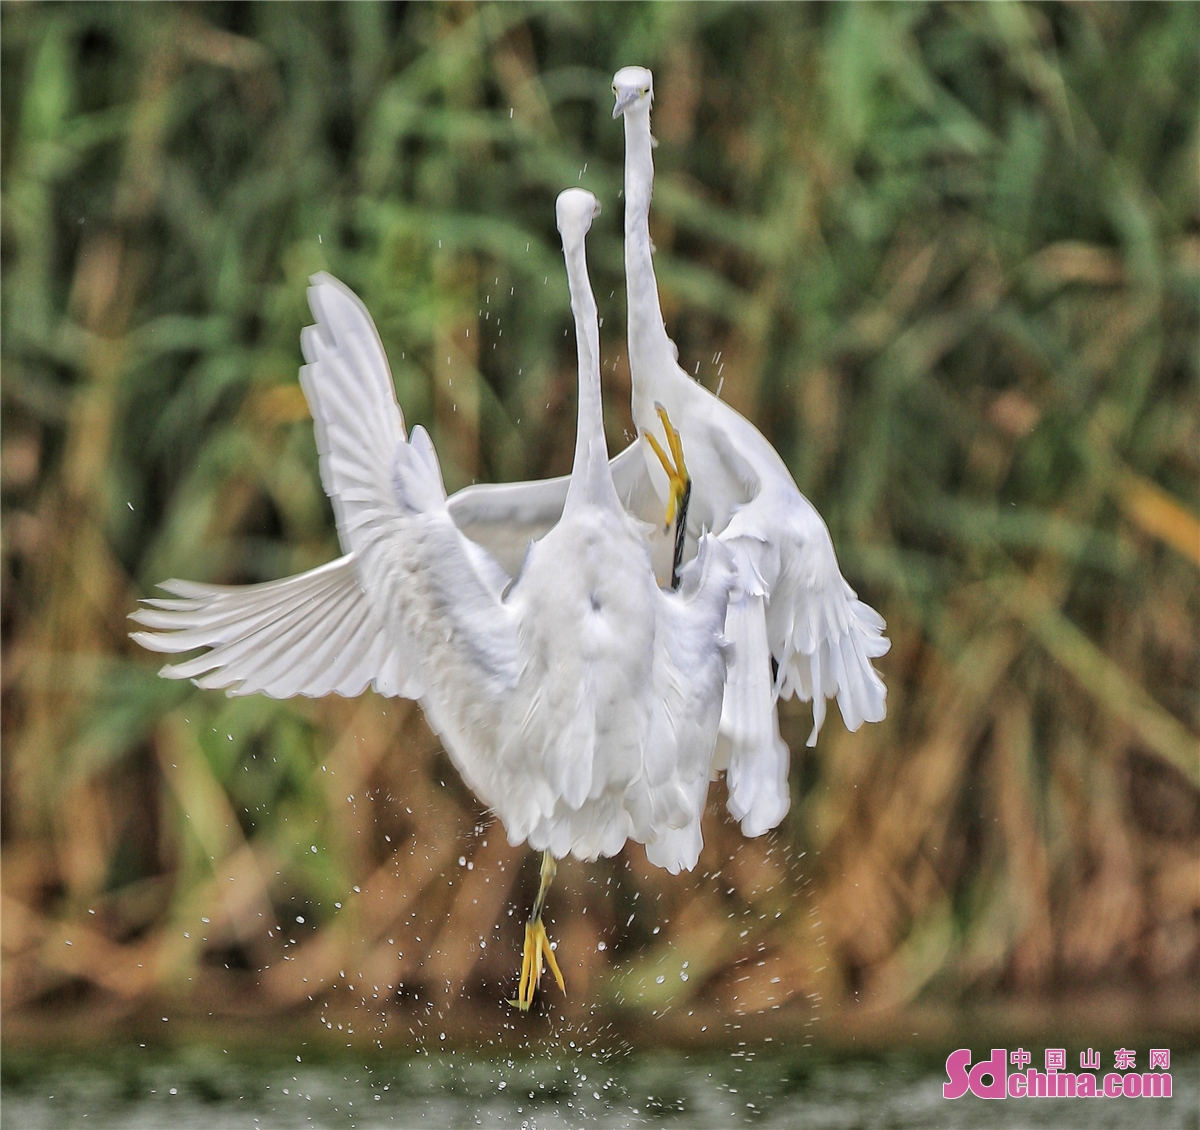 Egrets are seen on Zhangxiang Lake by the Xiaofu River. In recent years, the ecological environments of Xiaofu River and Ban River continue to improve, showing an ecological landscape of fishing leaping out of the clear water and birds singing in the green forest.<br/>